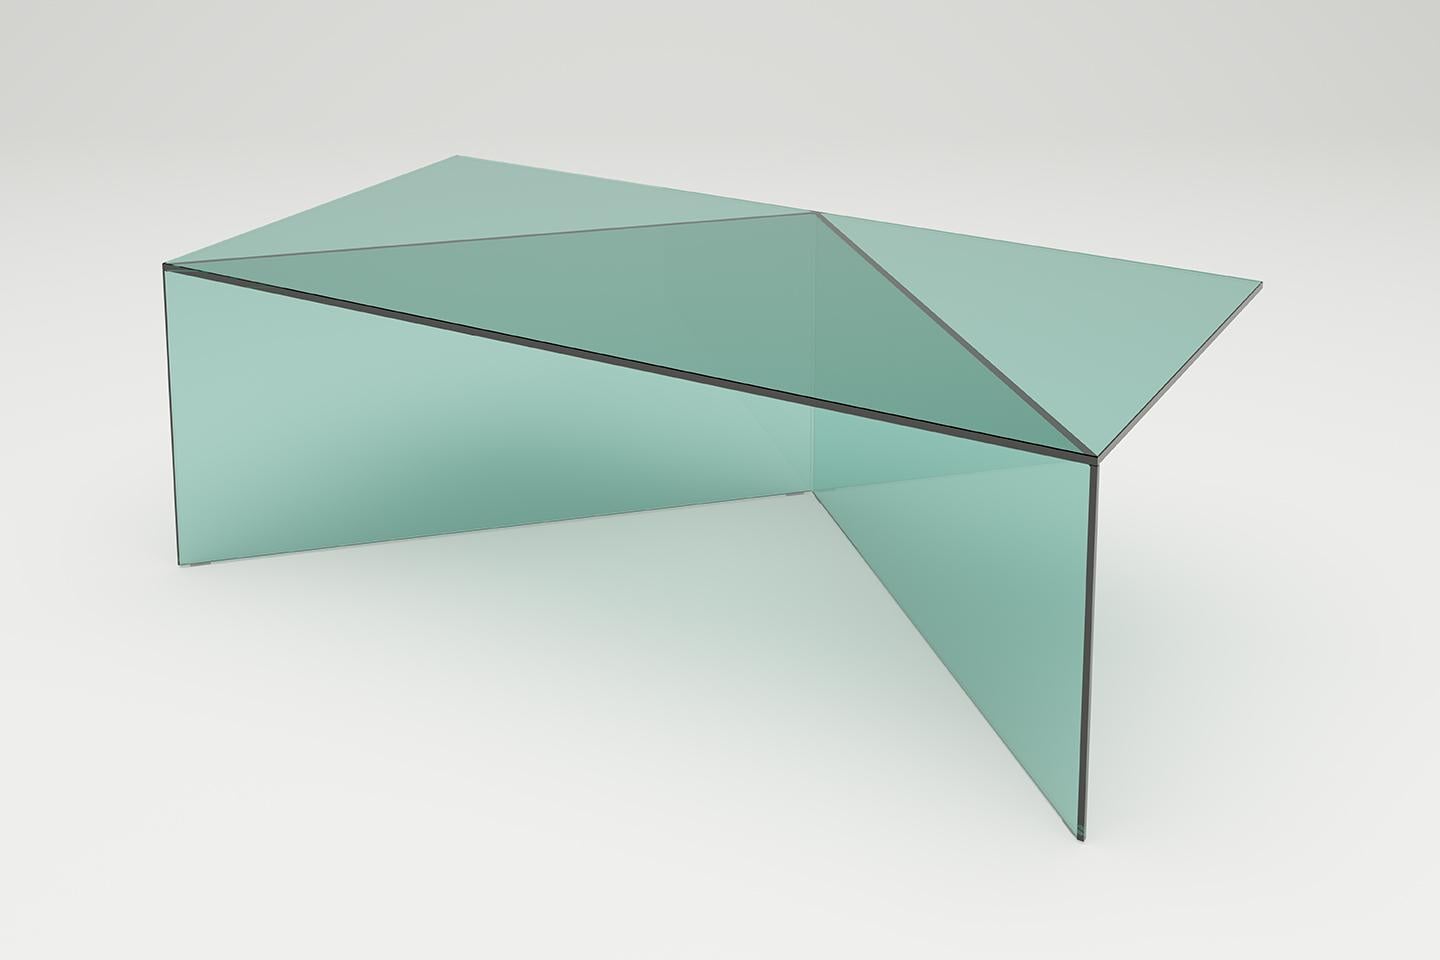 Green clear glass poly square coffe table by Sebastian Scherer
Dimensions: D120 x W30 x H40 cm
Materials: Solid coloured glass.
Weight: 34.4 kg.
Also Available: Colours:Clear white (transparent) / clear green / clear blue / clear bronze / clear